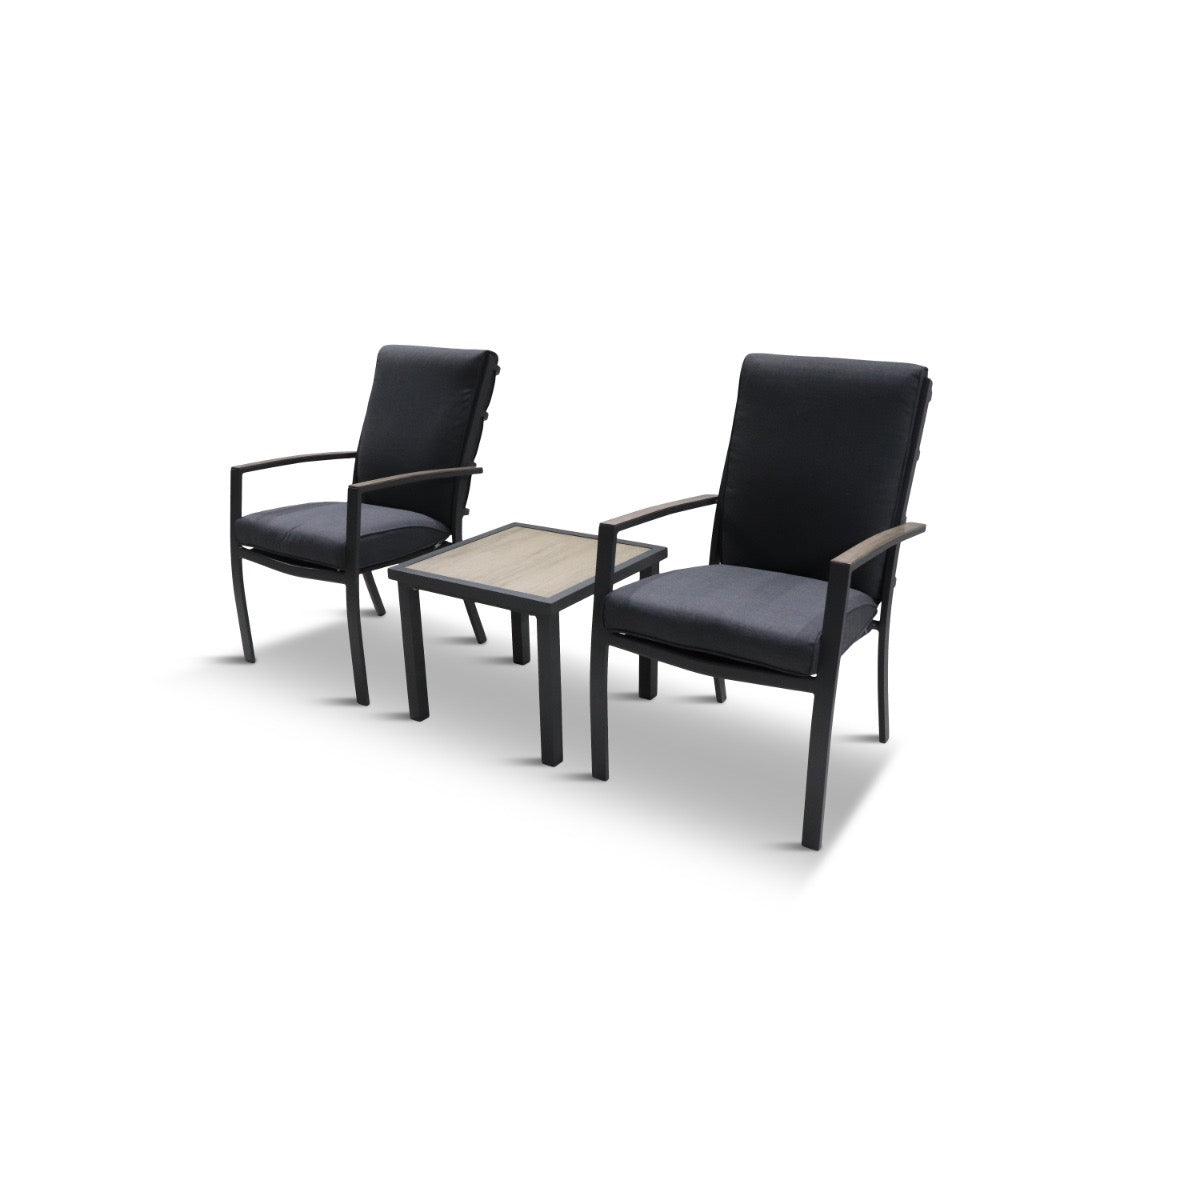 Monza Duo Set with Highback Chairs